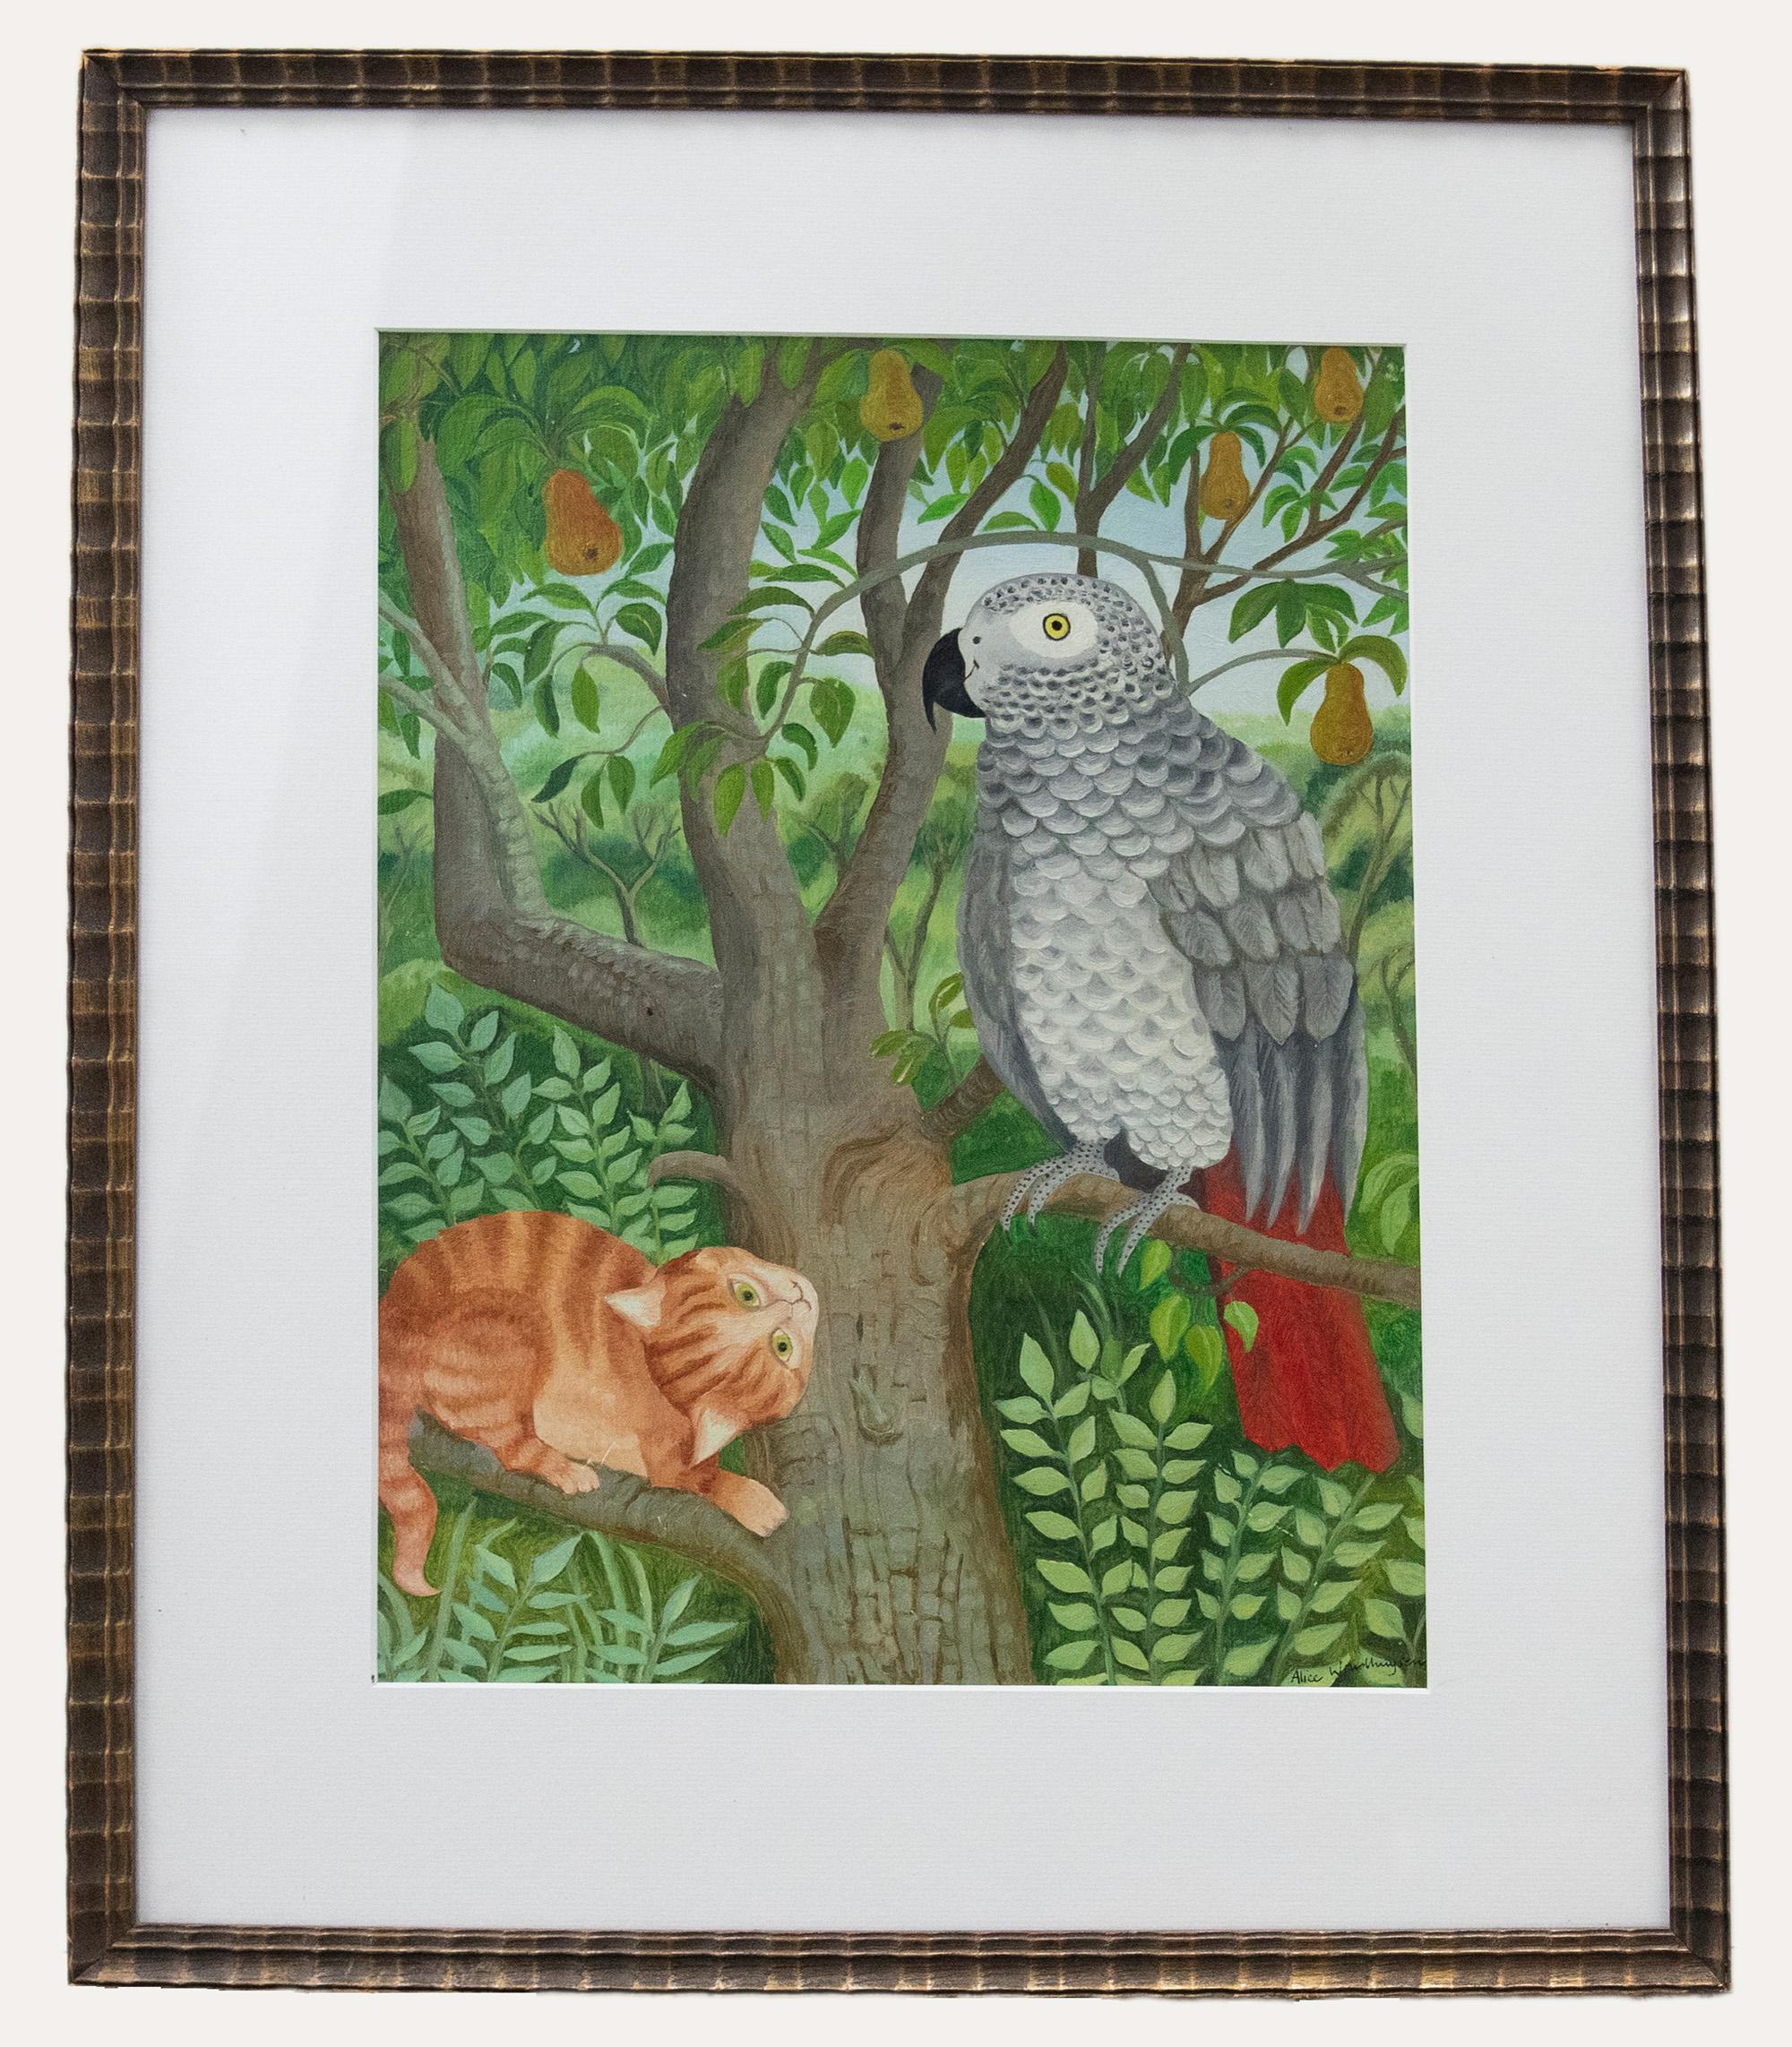 Unknown Animal Painting - Alice Woudhuysen - Framed Contemporary Oil, Parrot in a Pear Tree